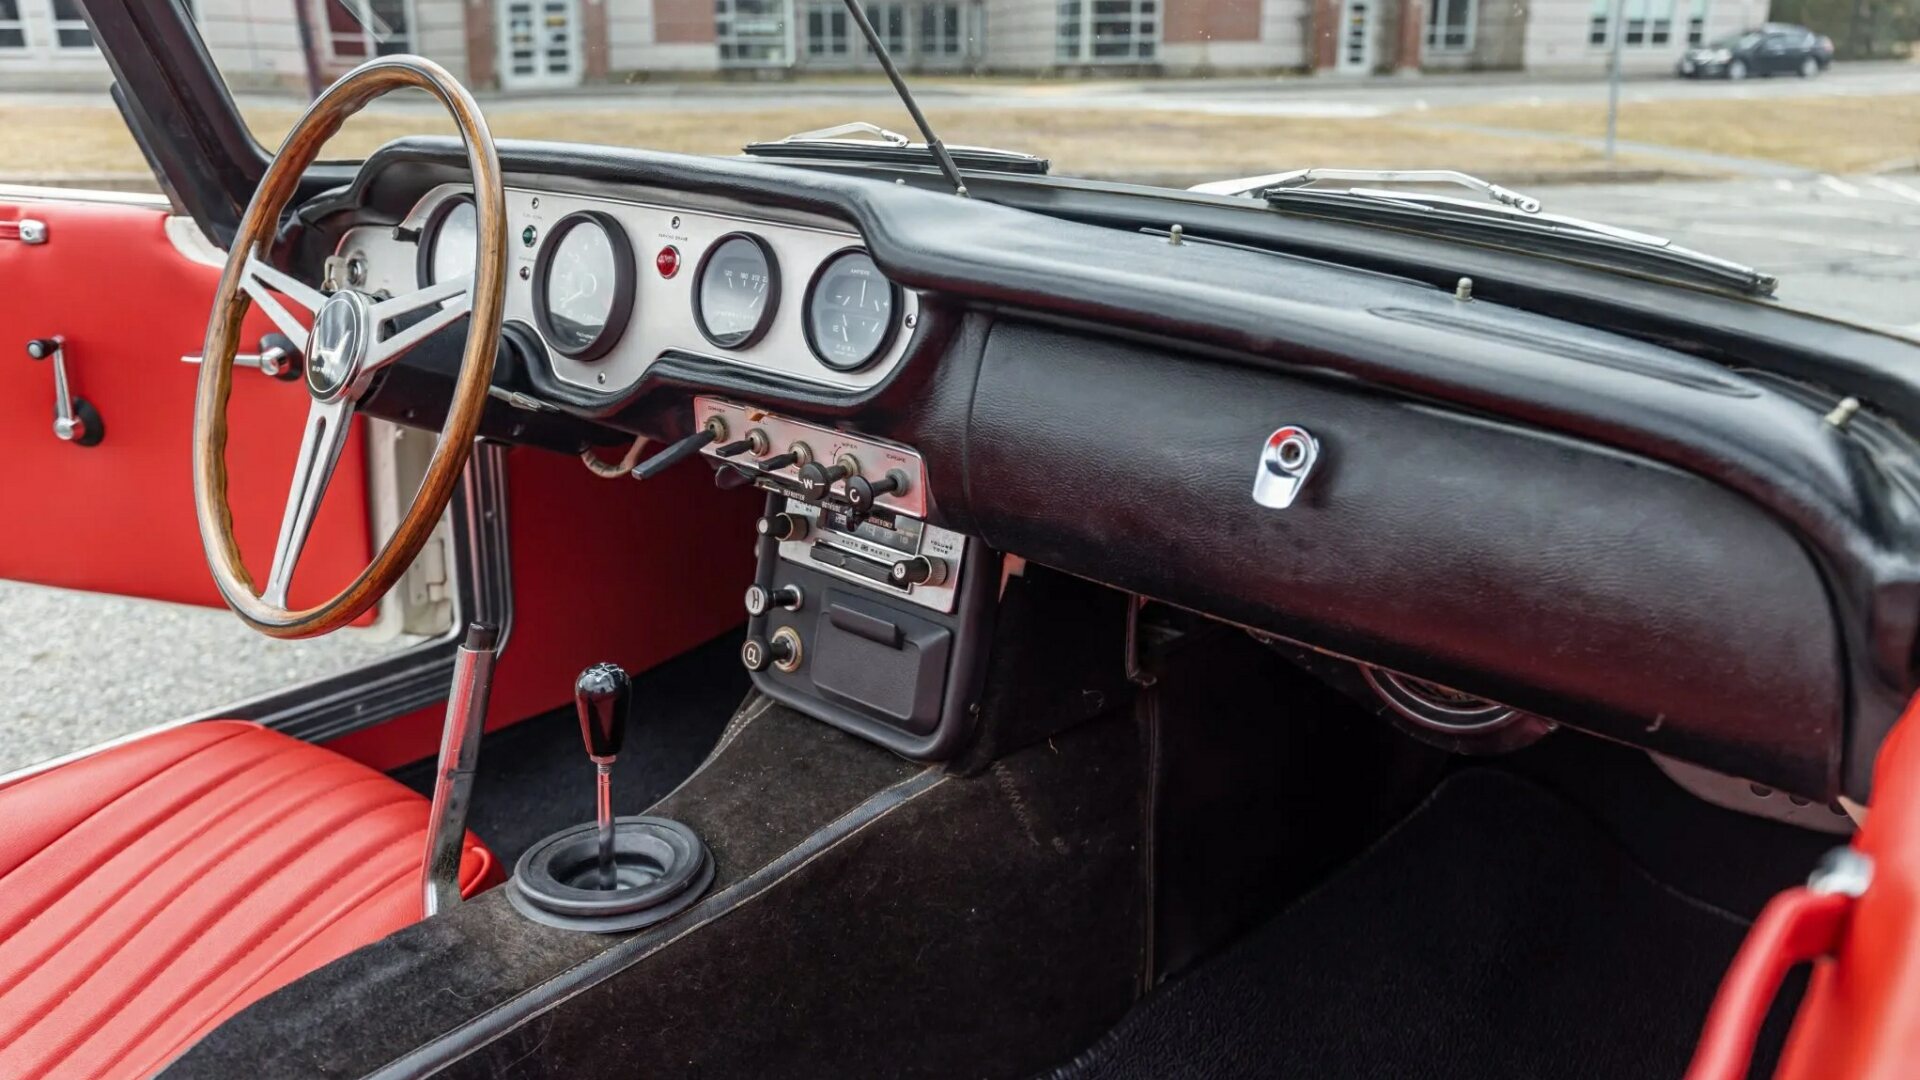 The Steering, Dashboard, And Center Console Of The 1966 Honda S600 Roadster